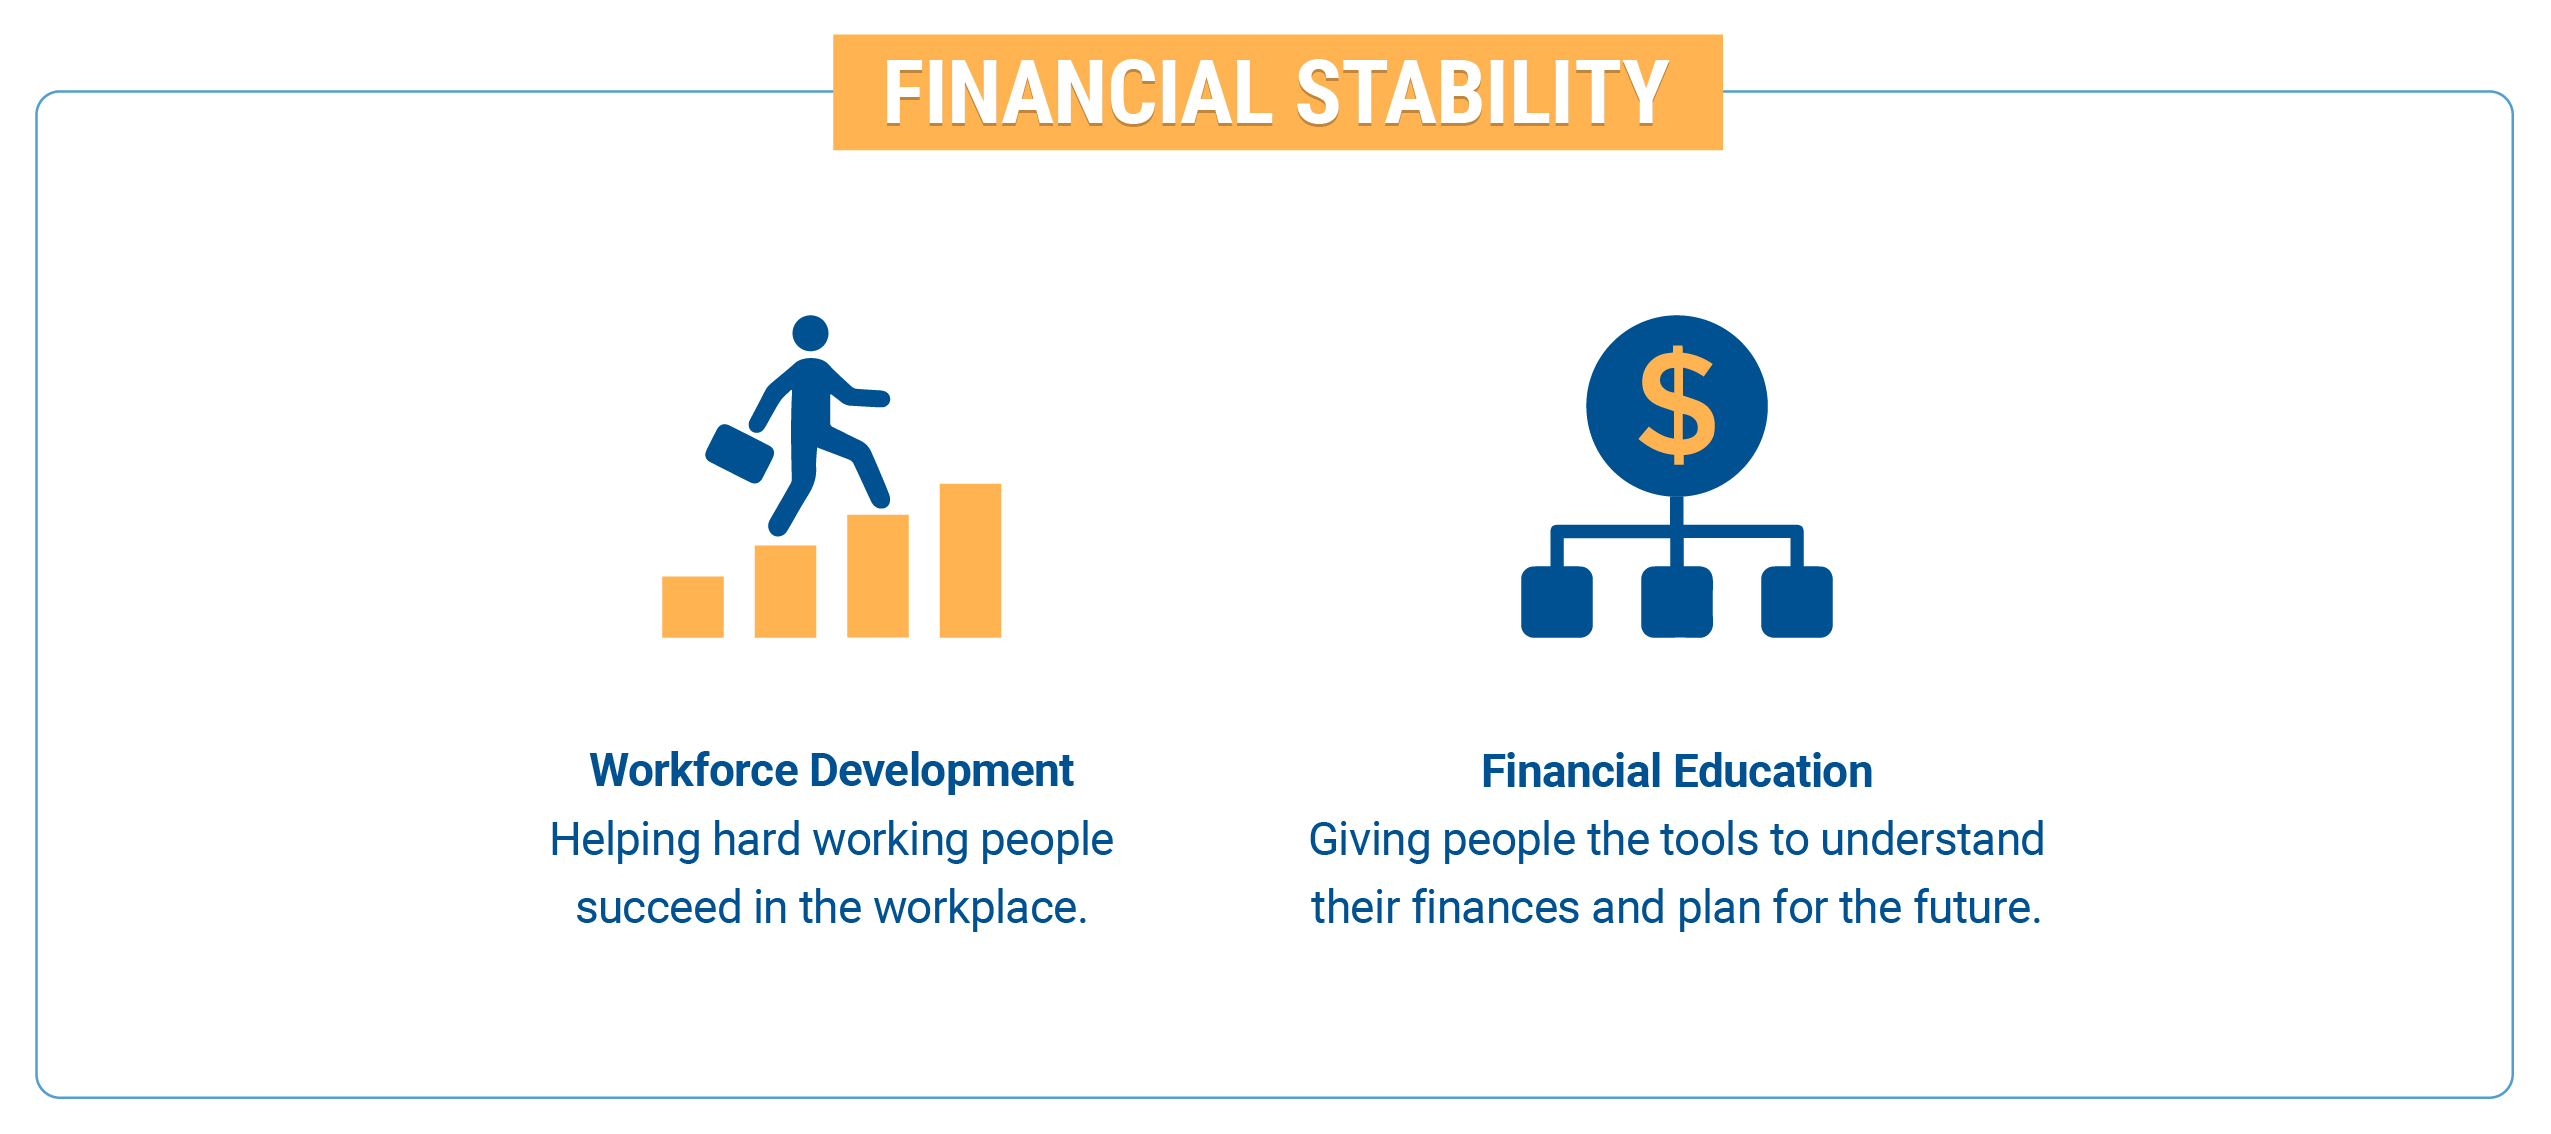 Financial Stability: Workforce Development. Helping hard working people succeed in the workplace. Financial Education, giving people the tools to understand their finances and plan for the future.